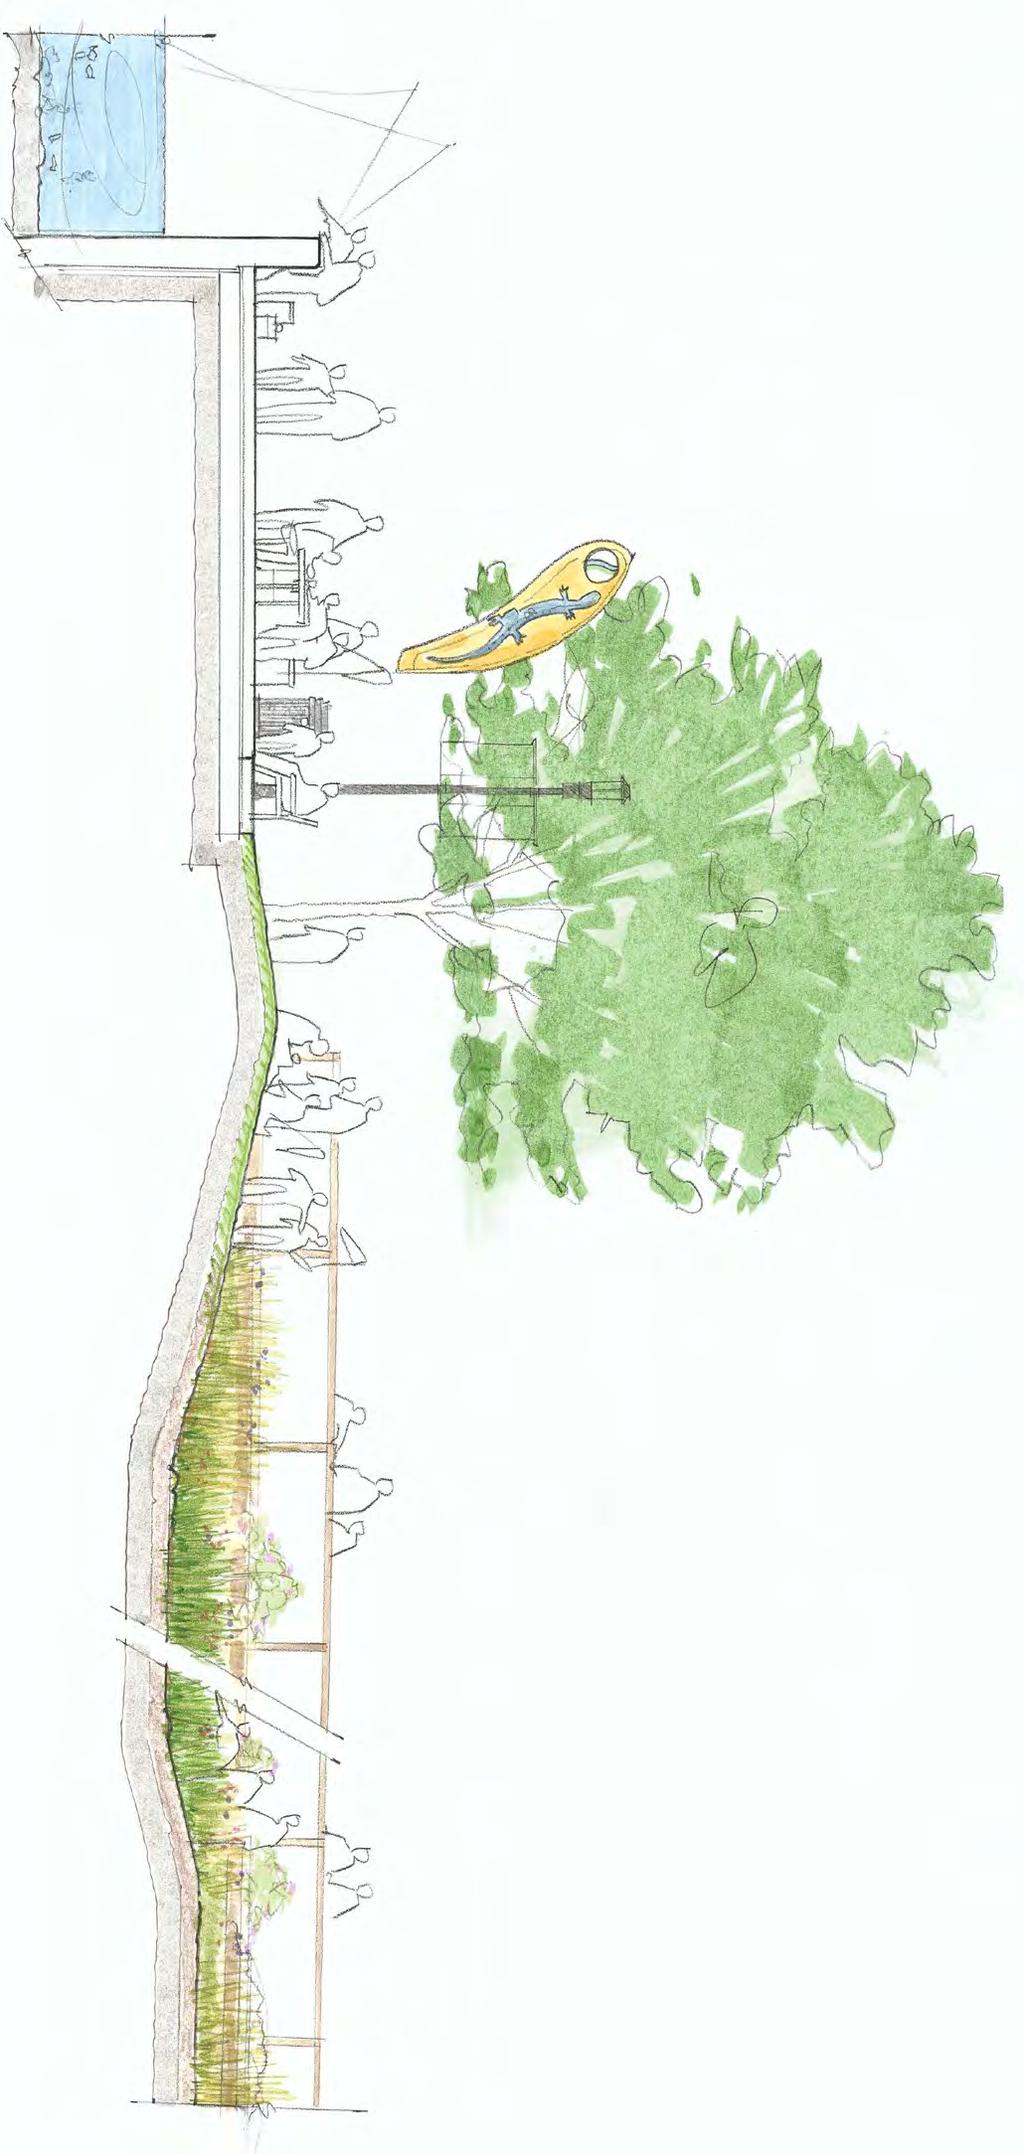 This illustrative section shows the proposed riverfront edge